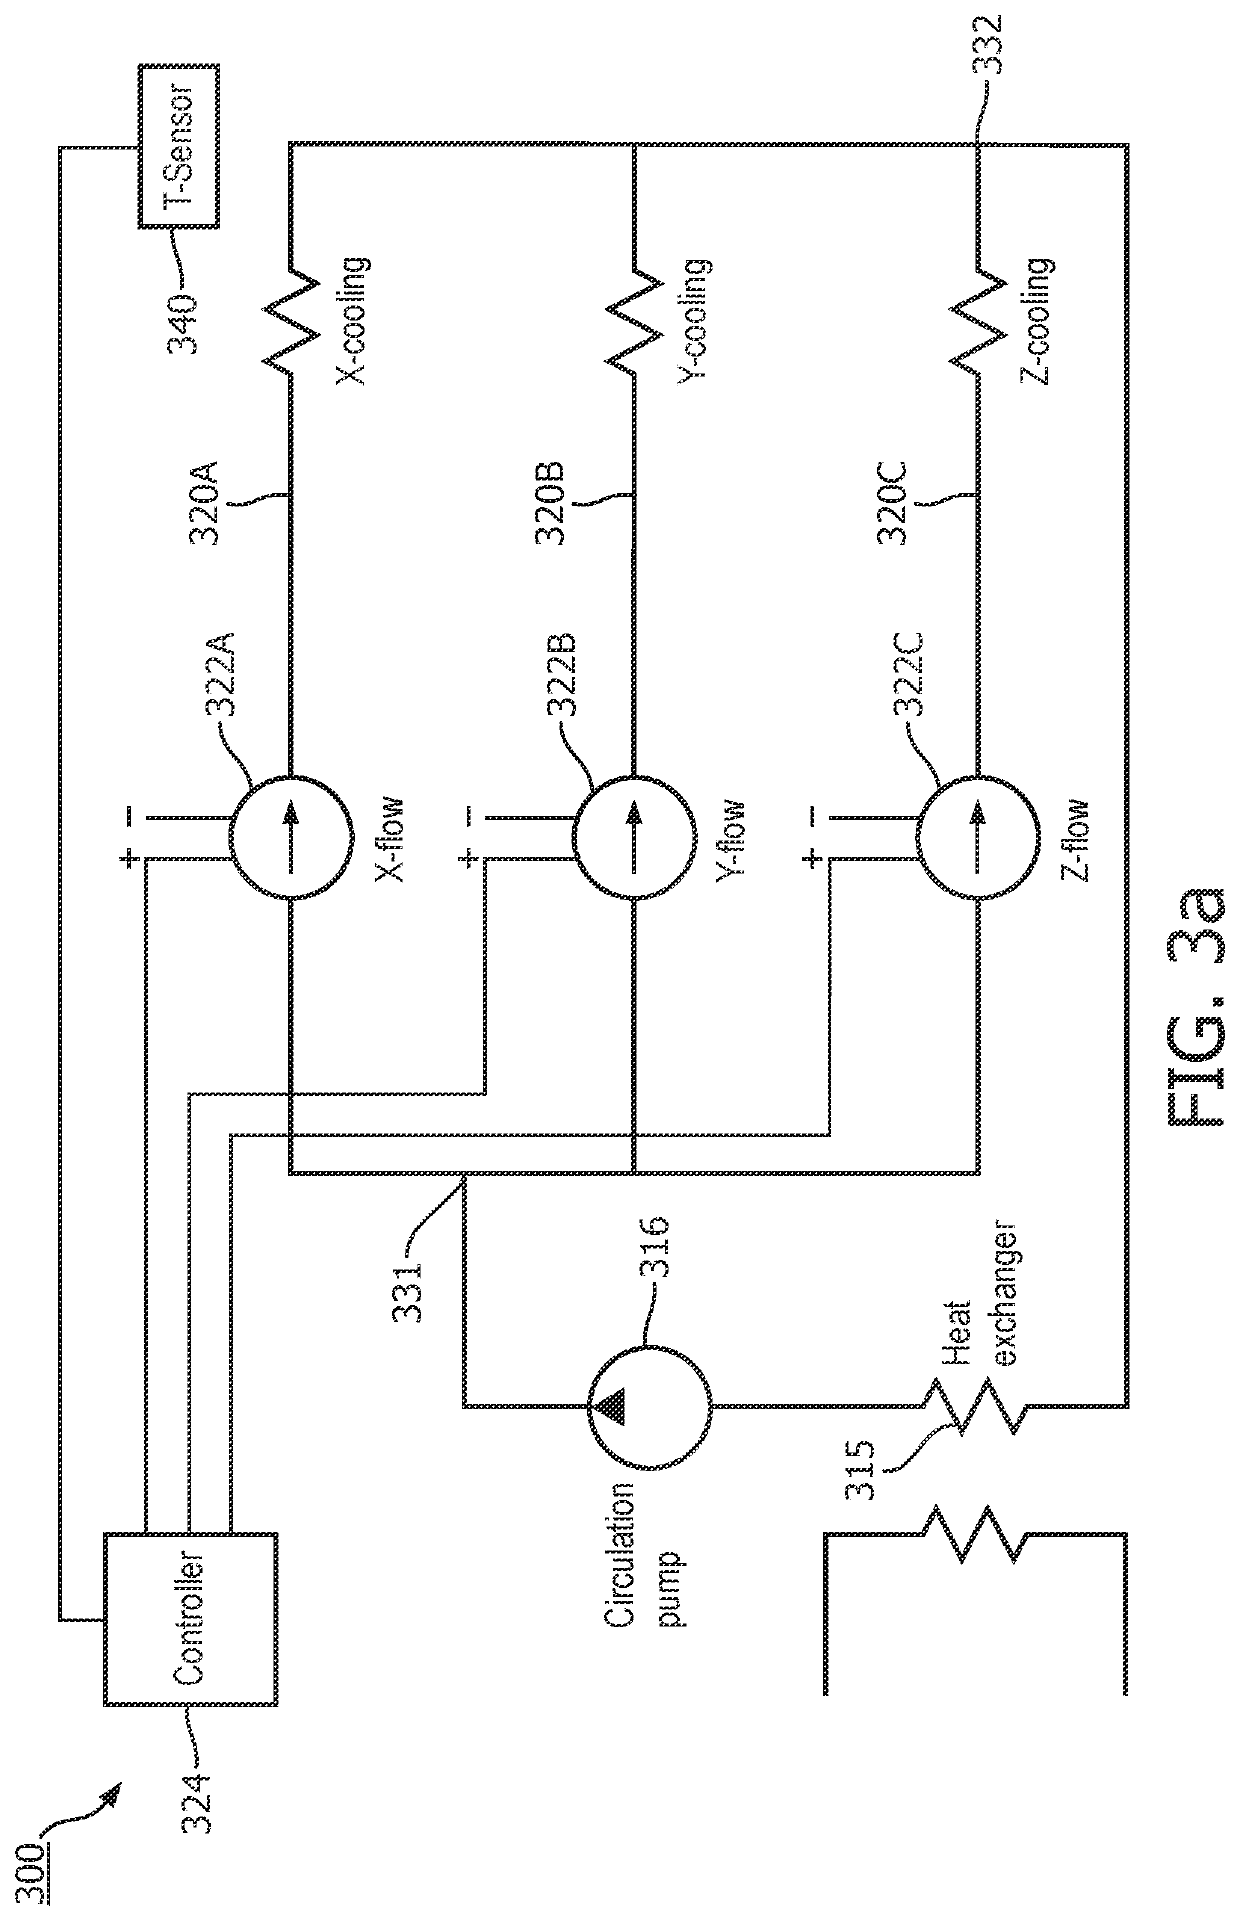 Gradient system with controlled cooling in the individual gradient channels